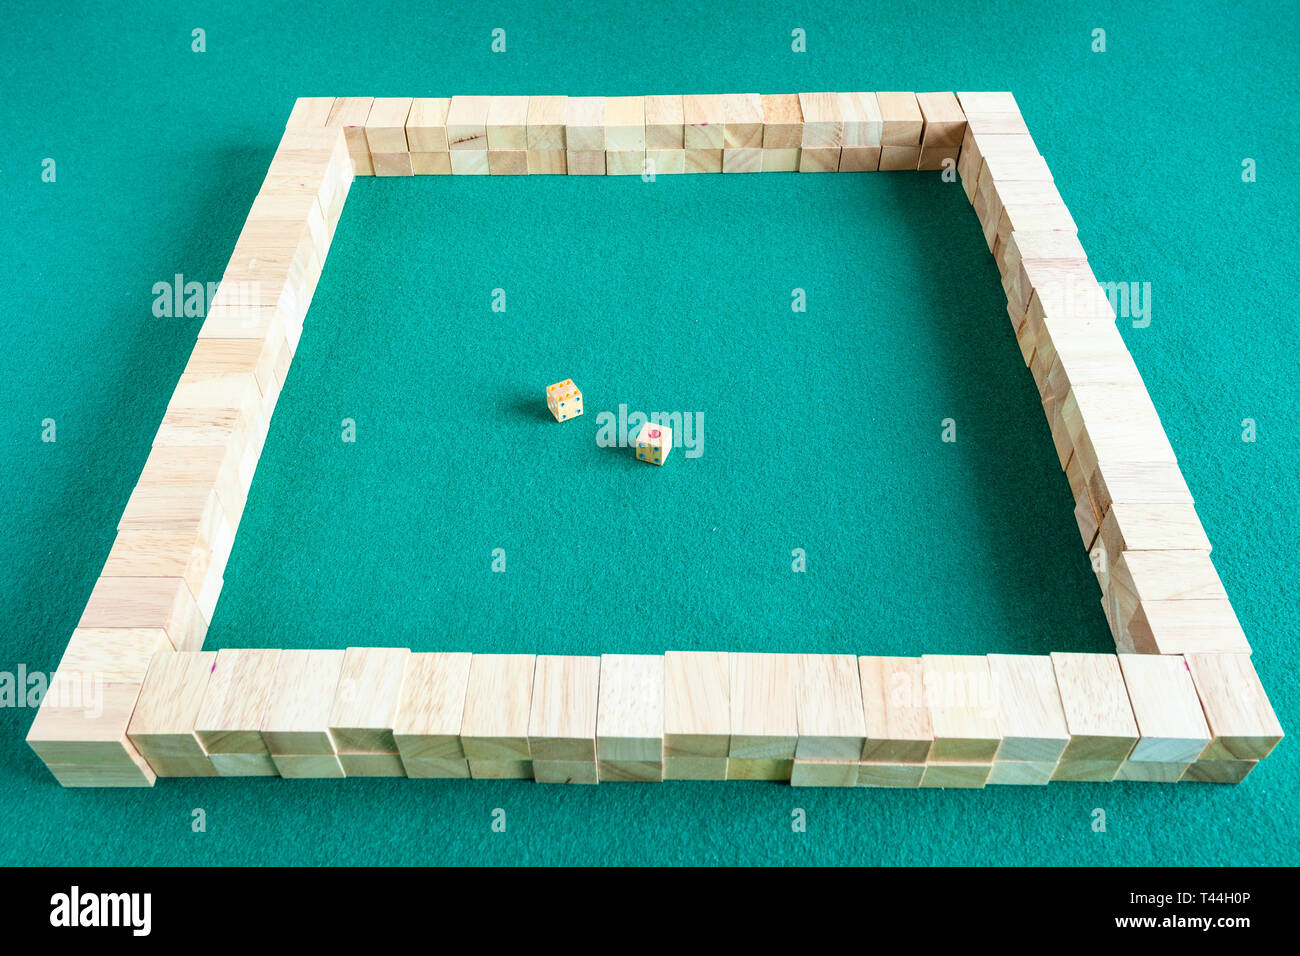 starting walls of mahjong, tile-based chinese strategy board game on green baize table Stock Photo